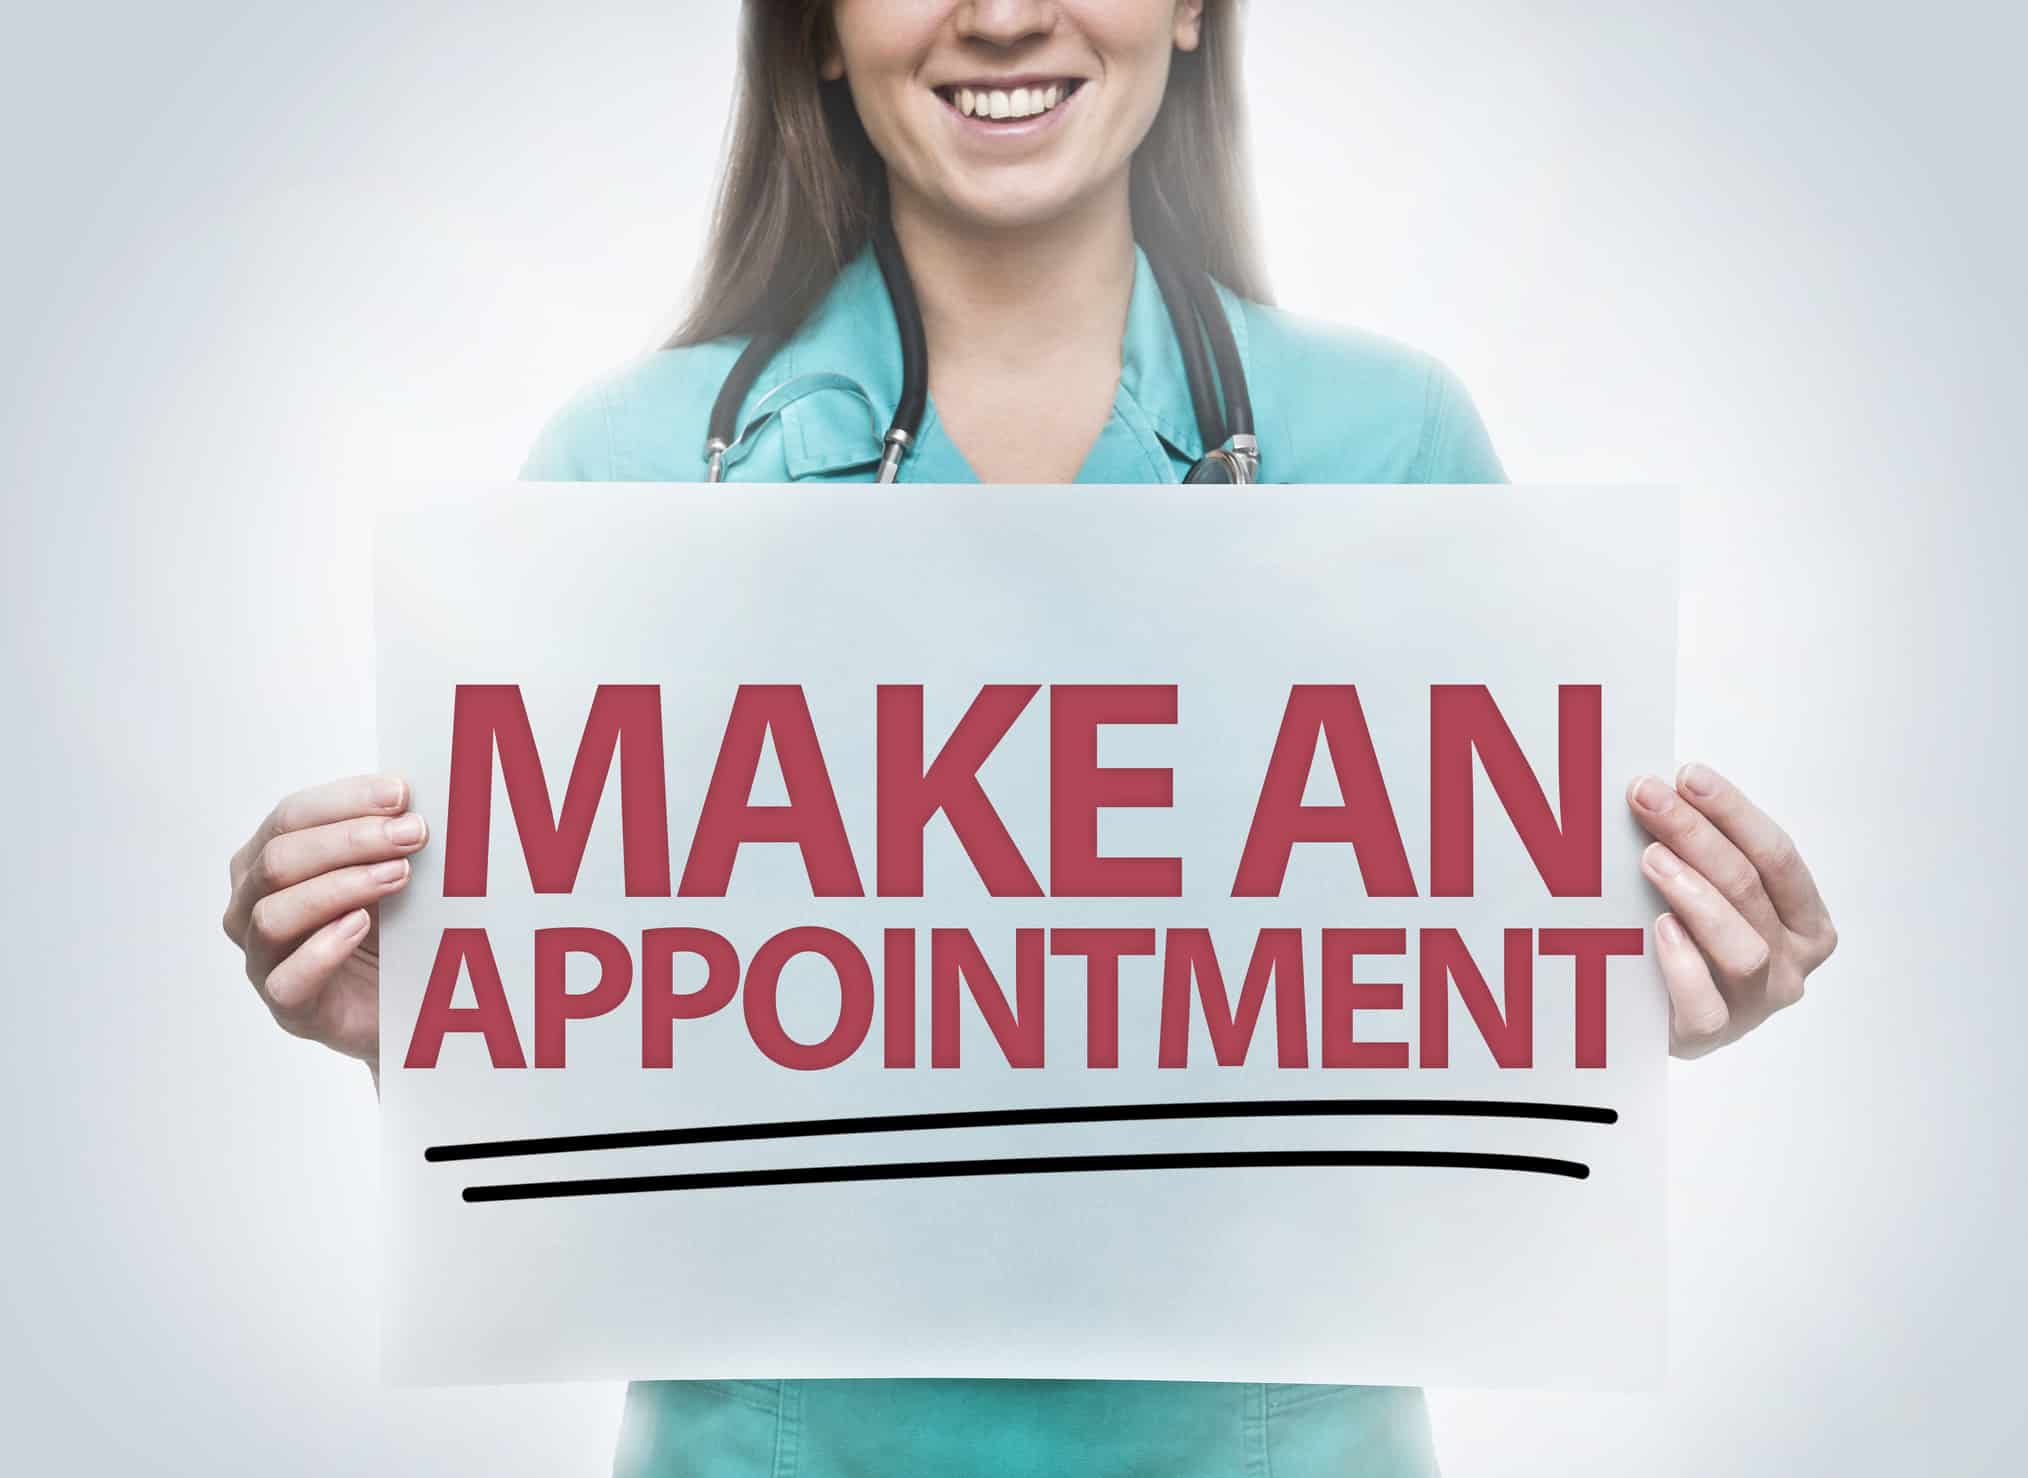 Make an appointment / Healthcare concept (Click for more)